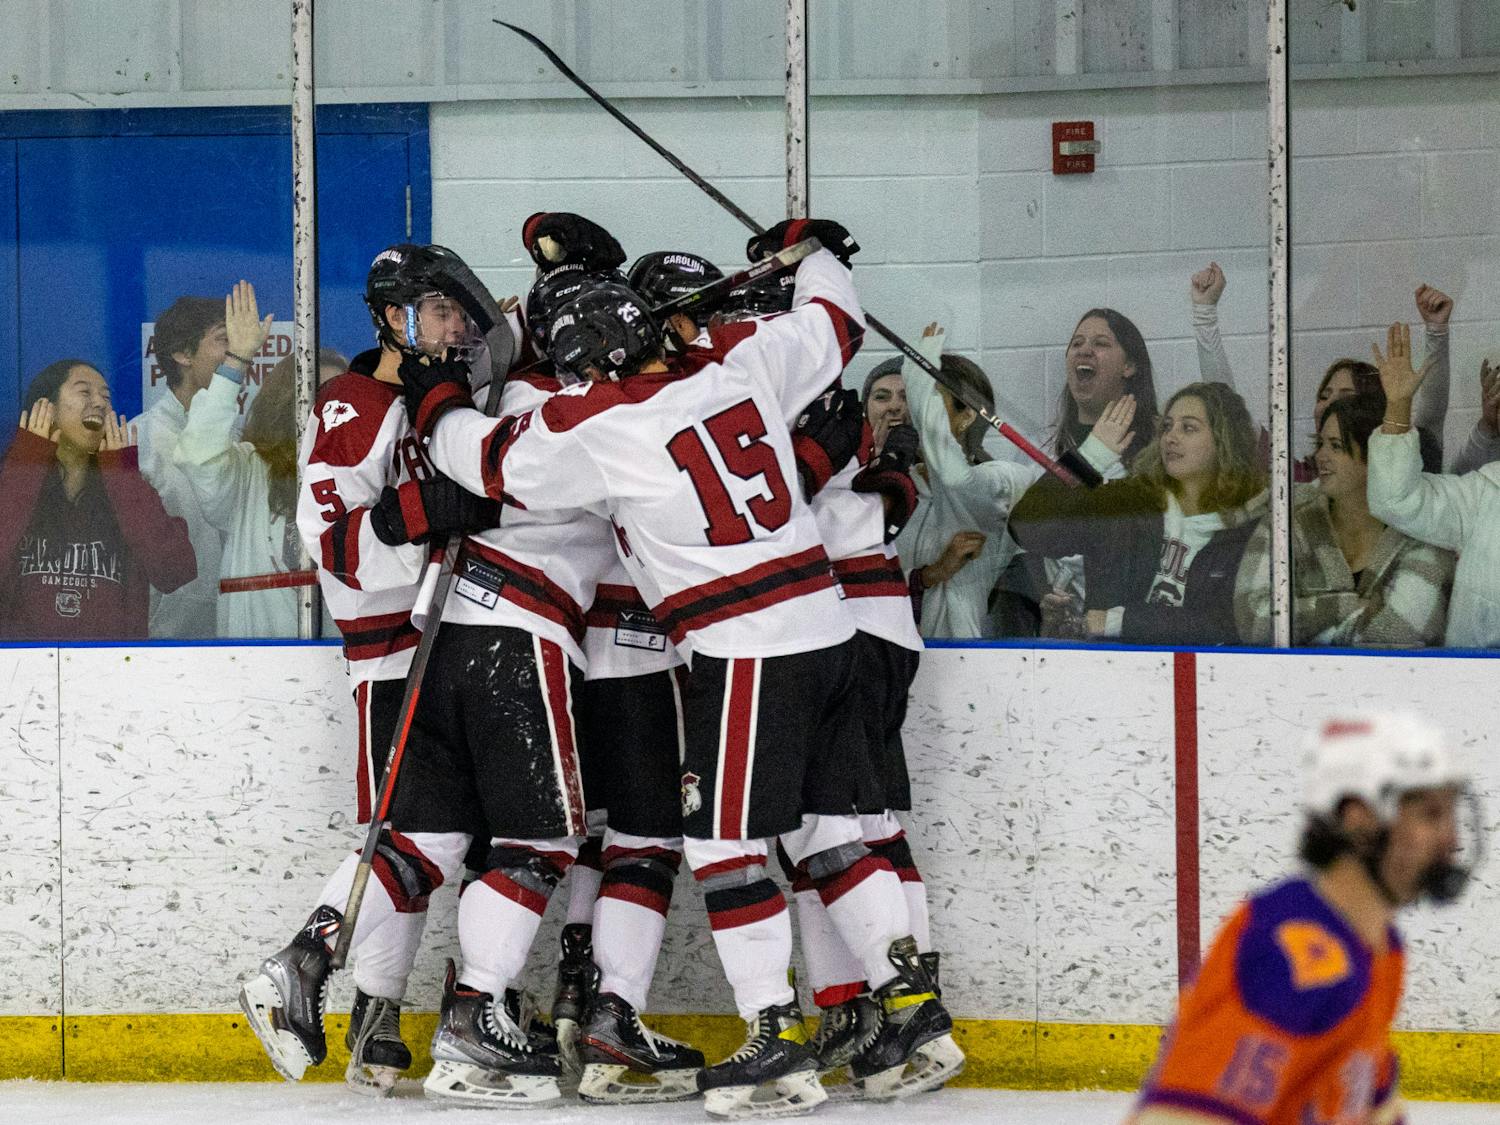 A group of South Carolina hockey players led by junior defenseman Bobby DiCicco celebrate following a goal against the Tigers on Nov. 11, 2022. As South Carolina continues its winning streak after defeating Clemson, fans pile against the glass cheering on the team.&nbsp;